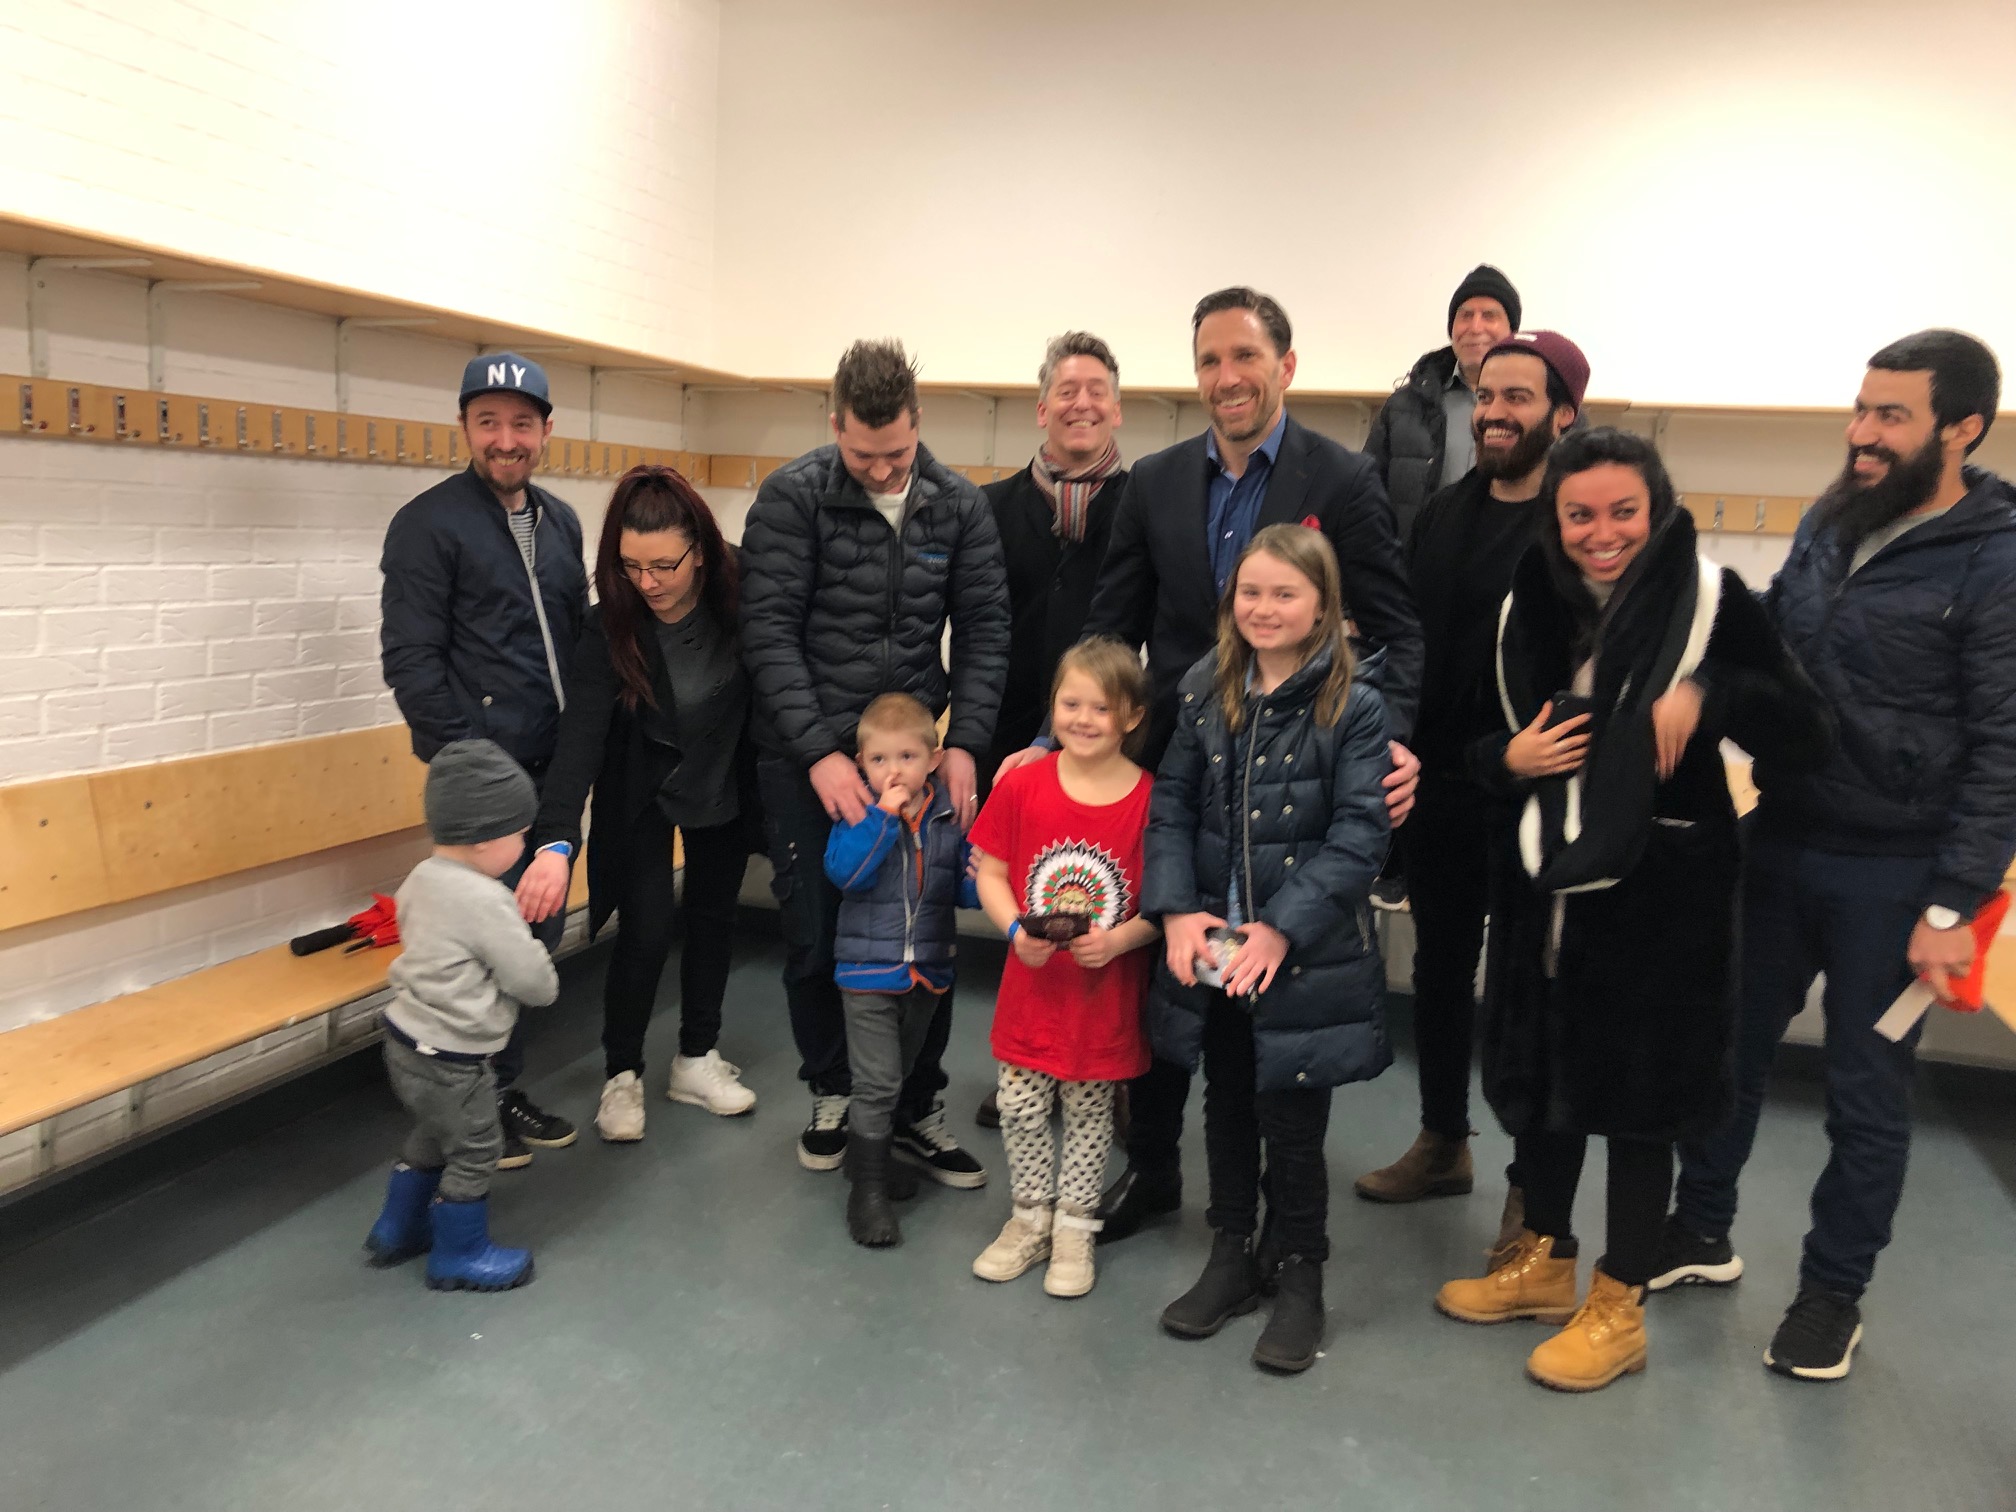 On Saturday March 9th, HLF together with Frolunda & Joel Lundqvist hosted the 4th group of families for the 2018/19 season from the Ronald McDonald House in Gothenburg.